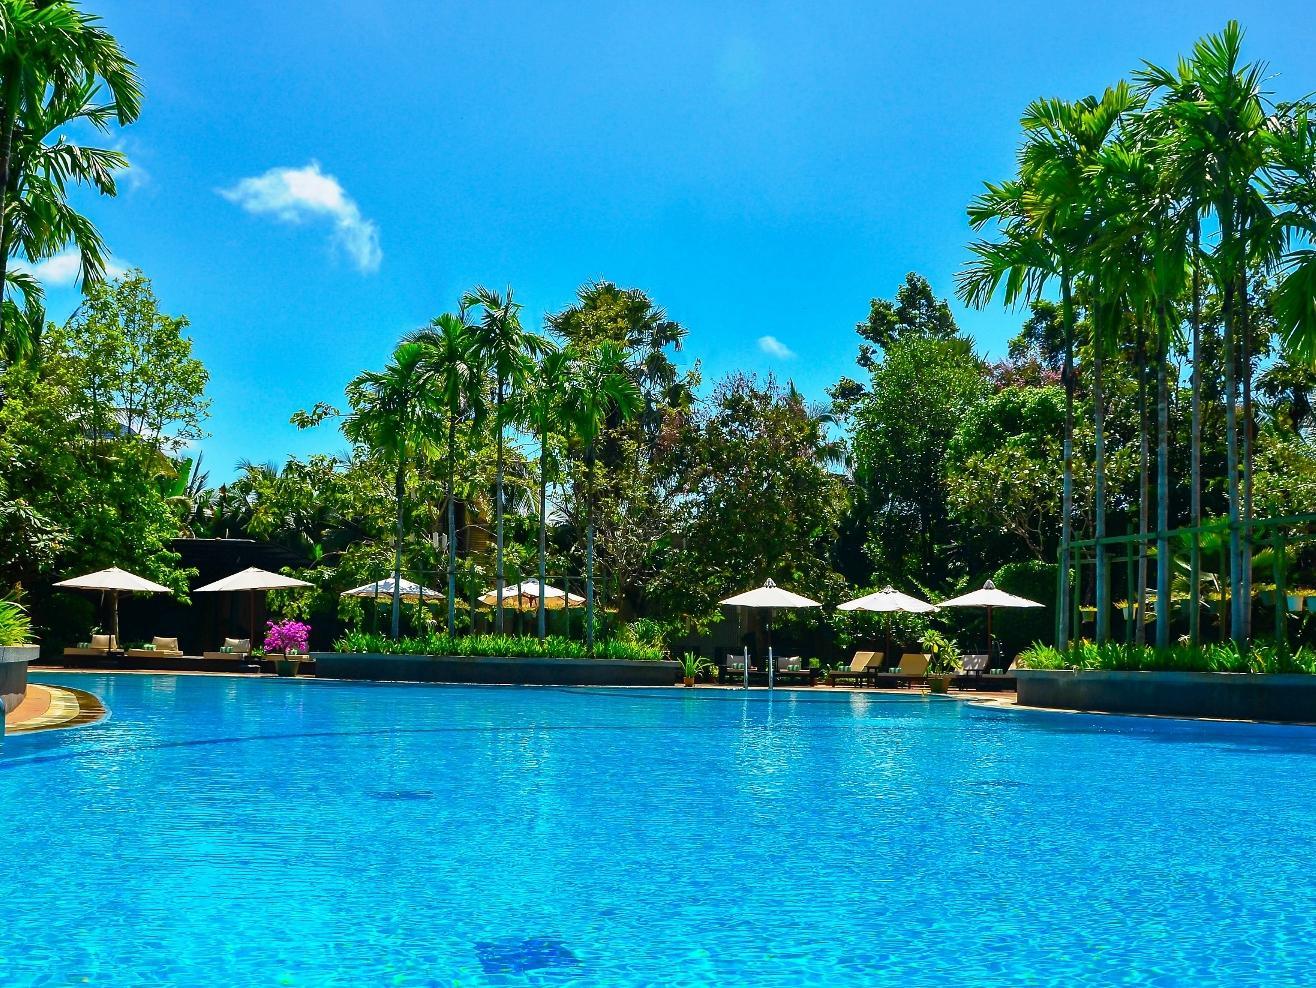 Borei Angkor Resort & Spa Siem Reap Province FAQ 2017, What facilities are there in Borei Angkor Resort & Spa Siem Reap Province 2017, What Languages Spoken are Supported in Borei Angkor Resort & Spa Siem Reap Province 2017, Which payment cards are accepted in Borei Angkor Resort & Spa Siem Reap Province , Siem Reap Province Borei Angkor Resort & Spa room facilities and services Q&A 2017, Siem Reap Province Borei Angkor Resort & Spa online booking services 2017, Siem Reap Province Borei Angkor Resort & Spa address 2017, Siem Reap Province Borei Angkor Resort & Spa telephone number 2017,Siem Reap Province Borei Angkor Resort & Spa map 2017, Siem Reap Province Borei Angkor Resort & Spa traffic guide 2017, how to go Siem Reap Province Borei Angkor Resort & Spa, Siem Reap Province Borei Angkor Resort & Spa booking online 2017, Siem Reap Province Borei Angkor Resort & Spa room types 2017.